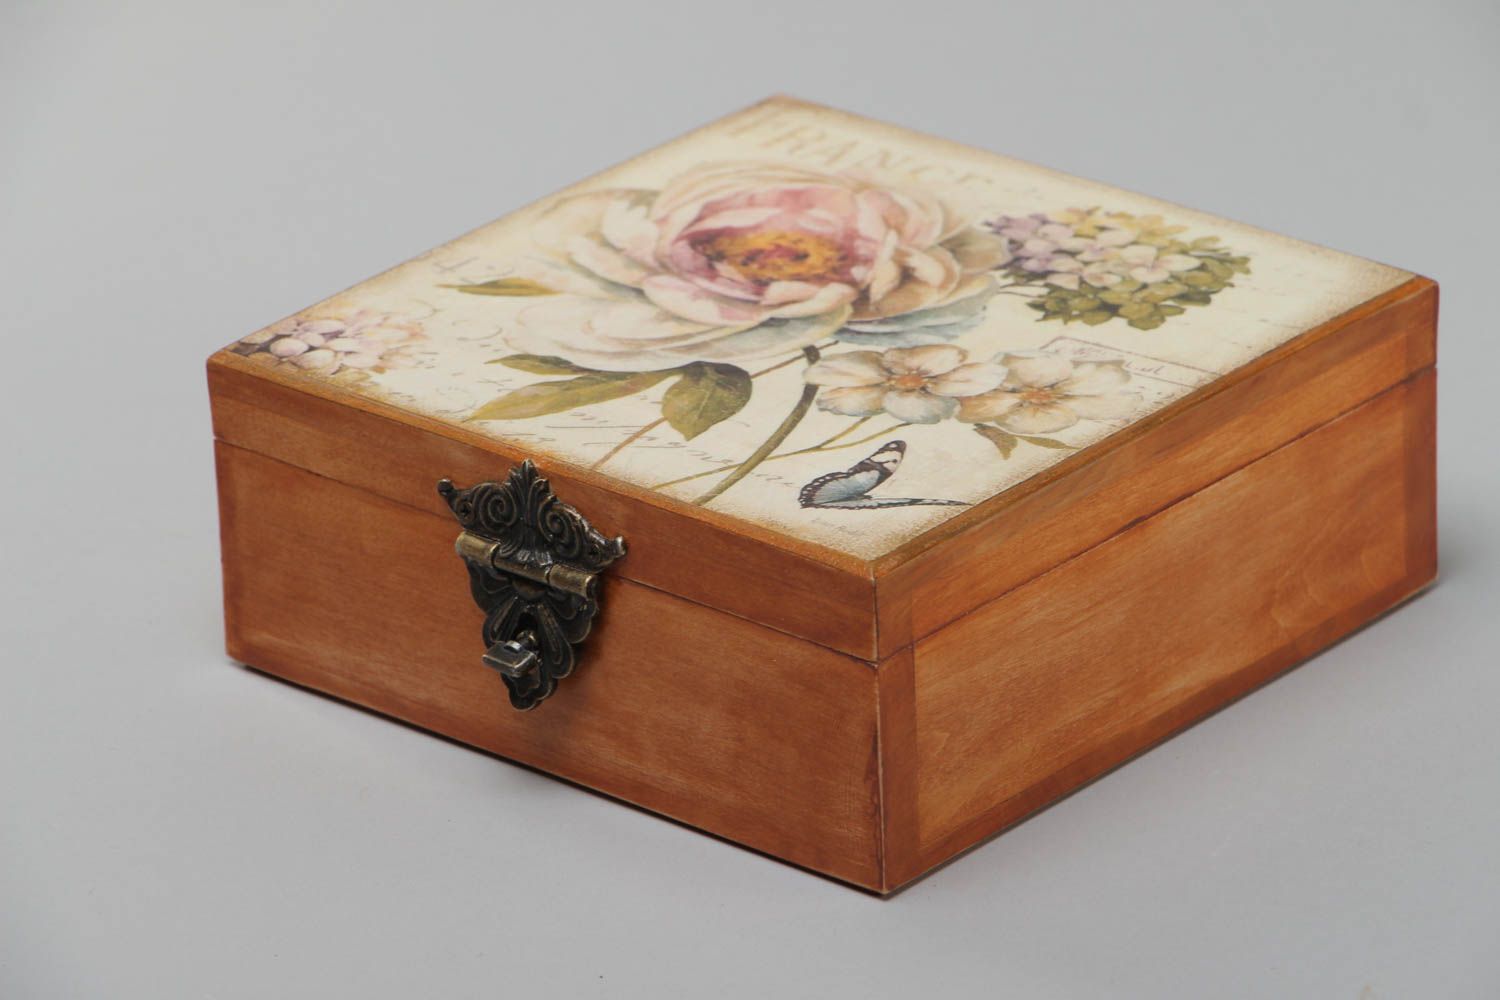 Handmade decorative square wooden jewelry box with floral retro print on lid photo 4